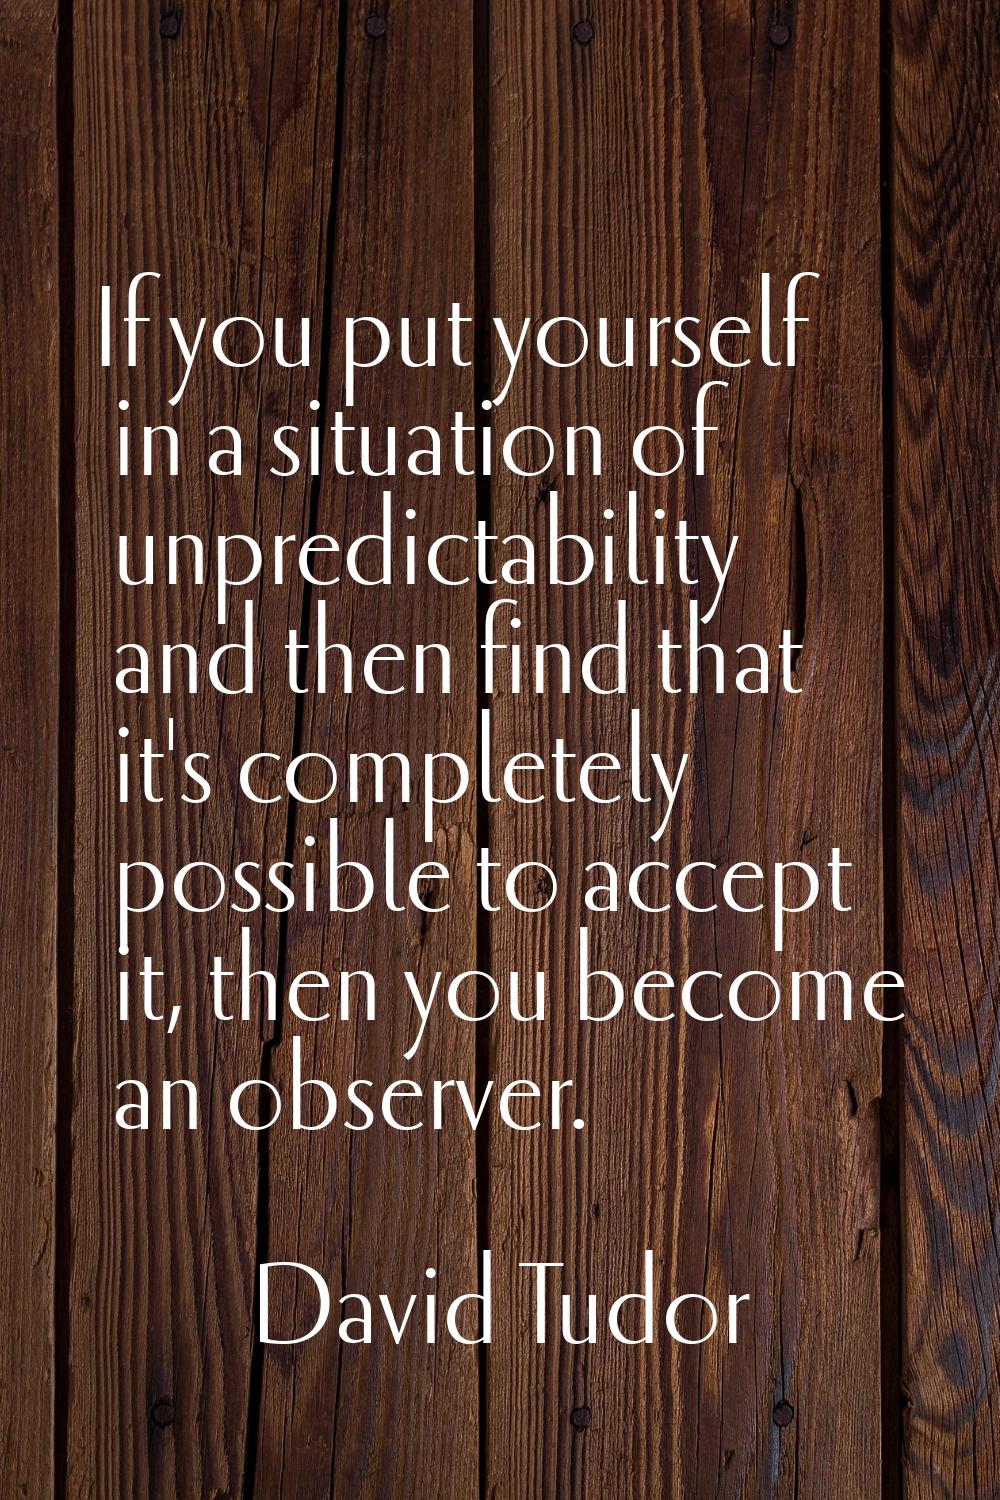 If you put yourself in a situation of unpredictability and then find that it's completely possible 